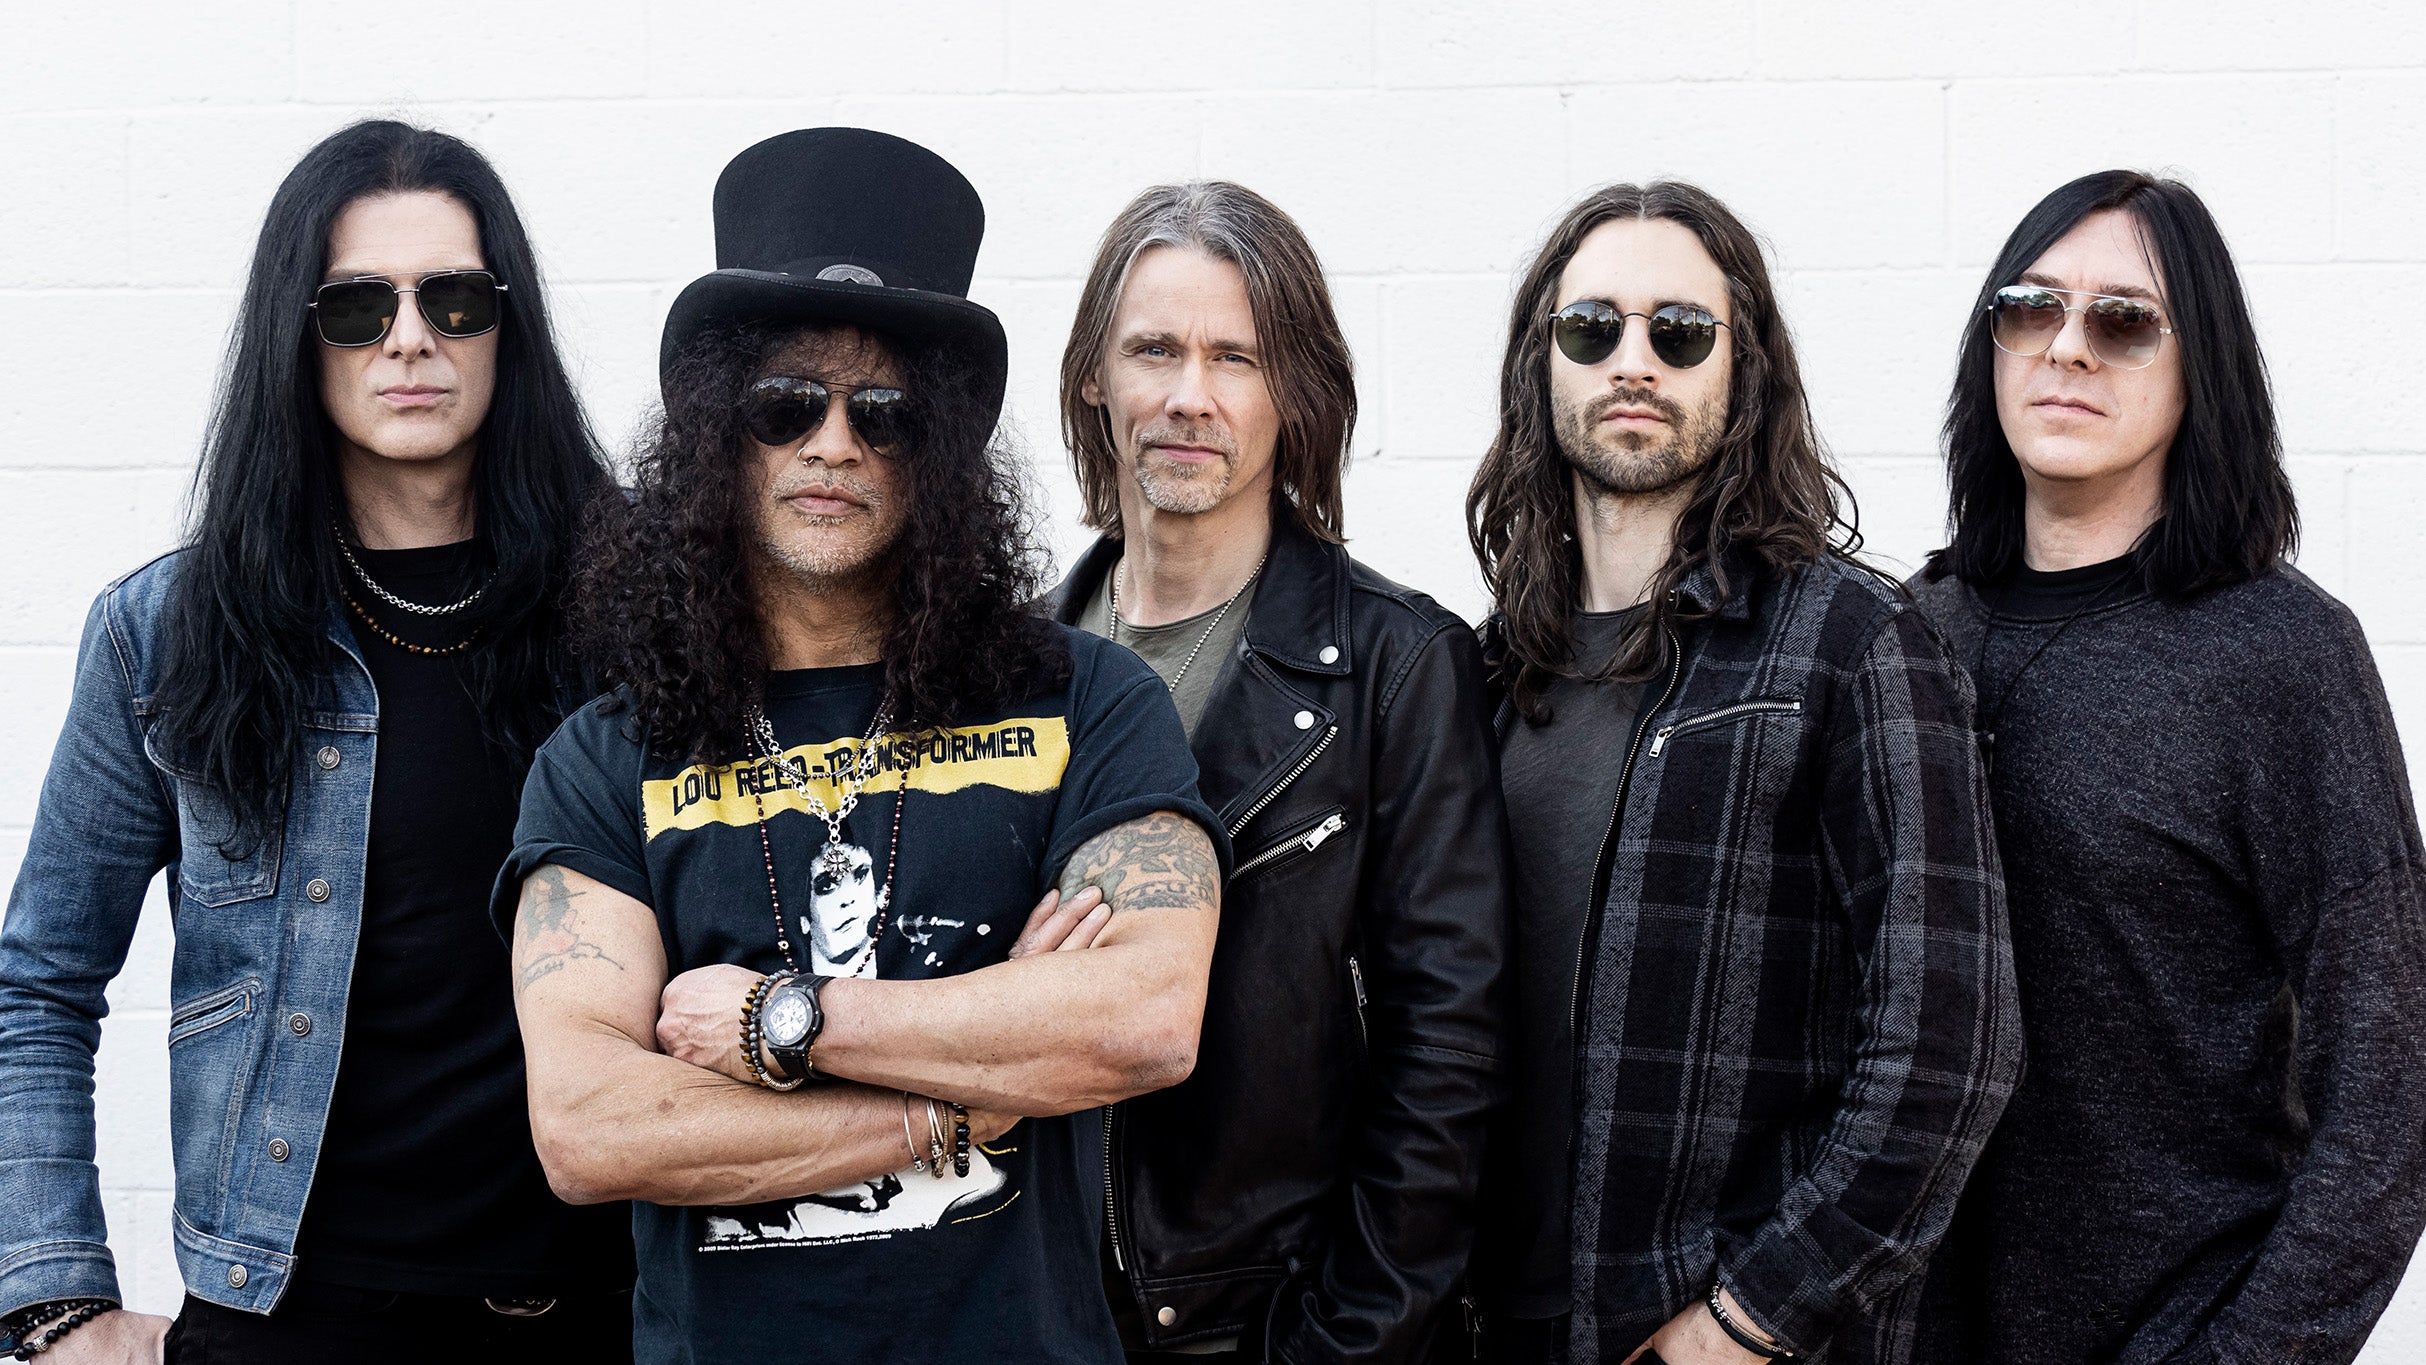 Ticket Reselling SLASH feat. Myles Kennedy and The Conspirators